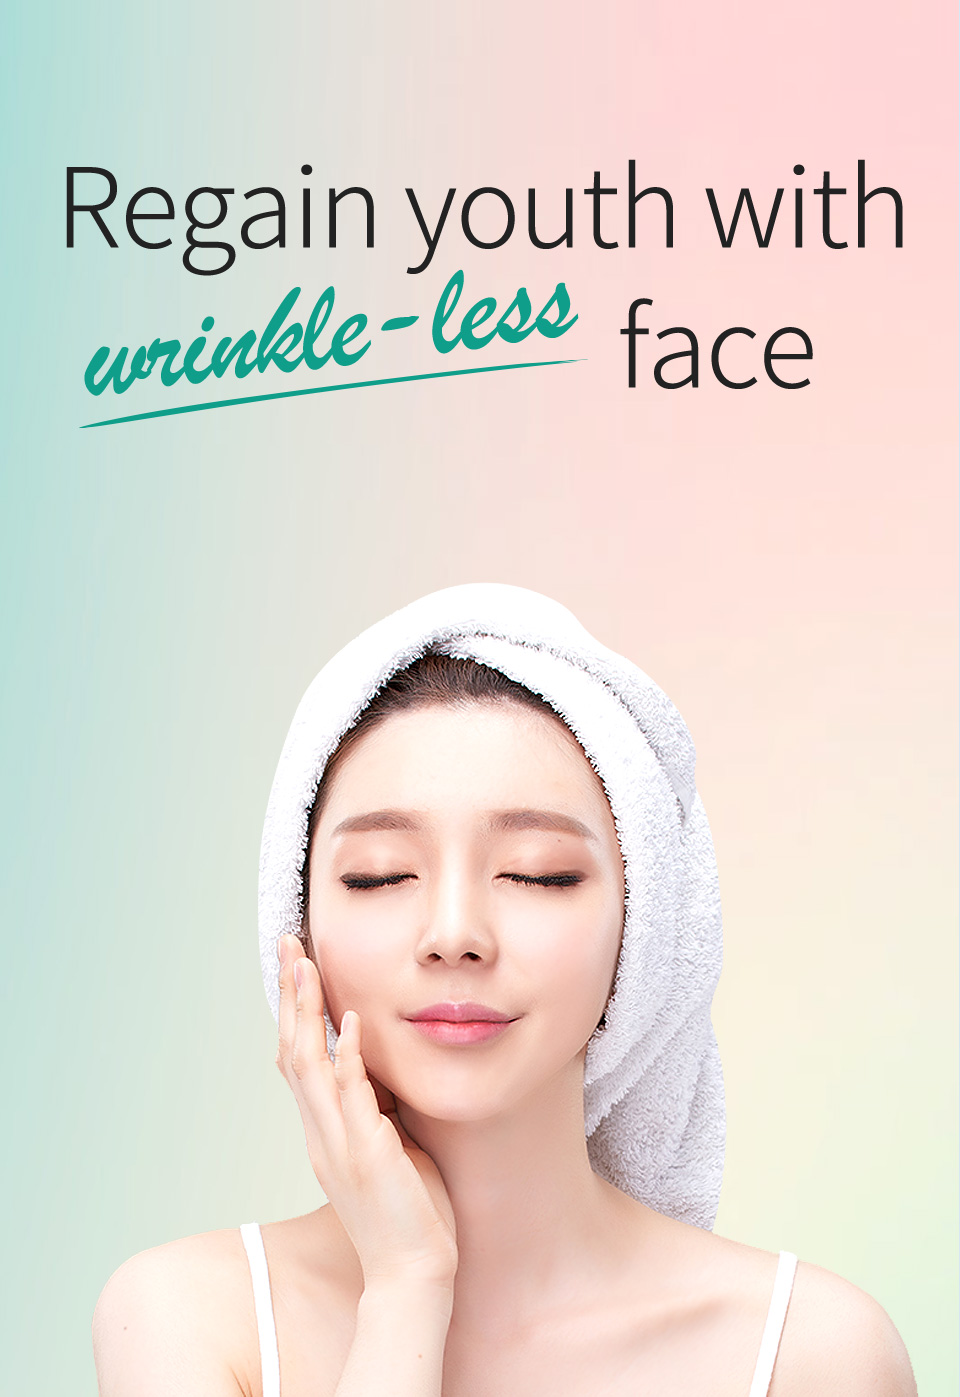 Regain youth with wrinkle-less face